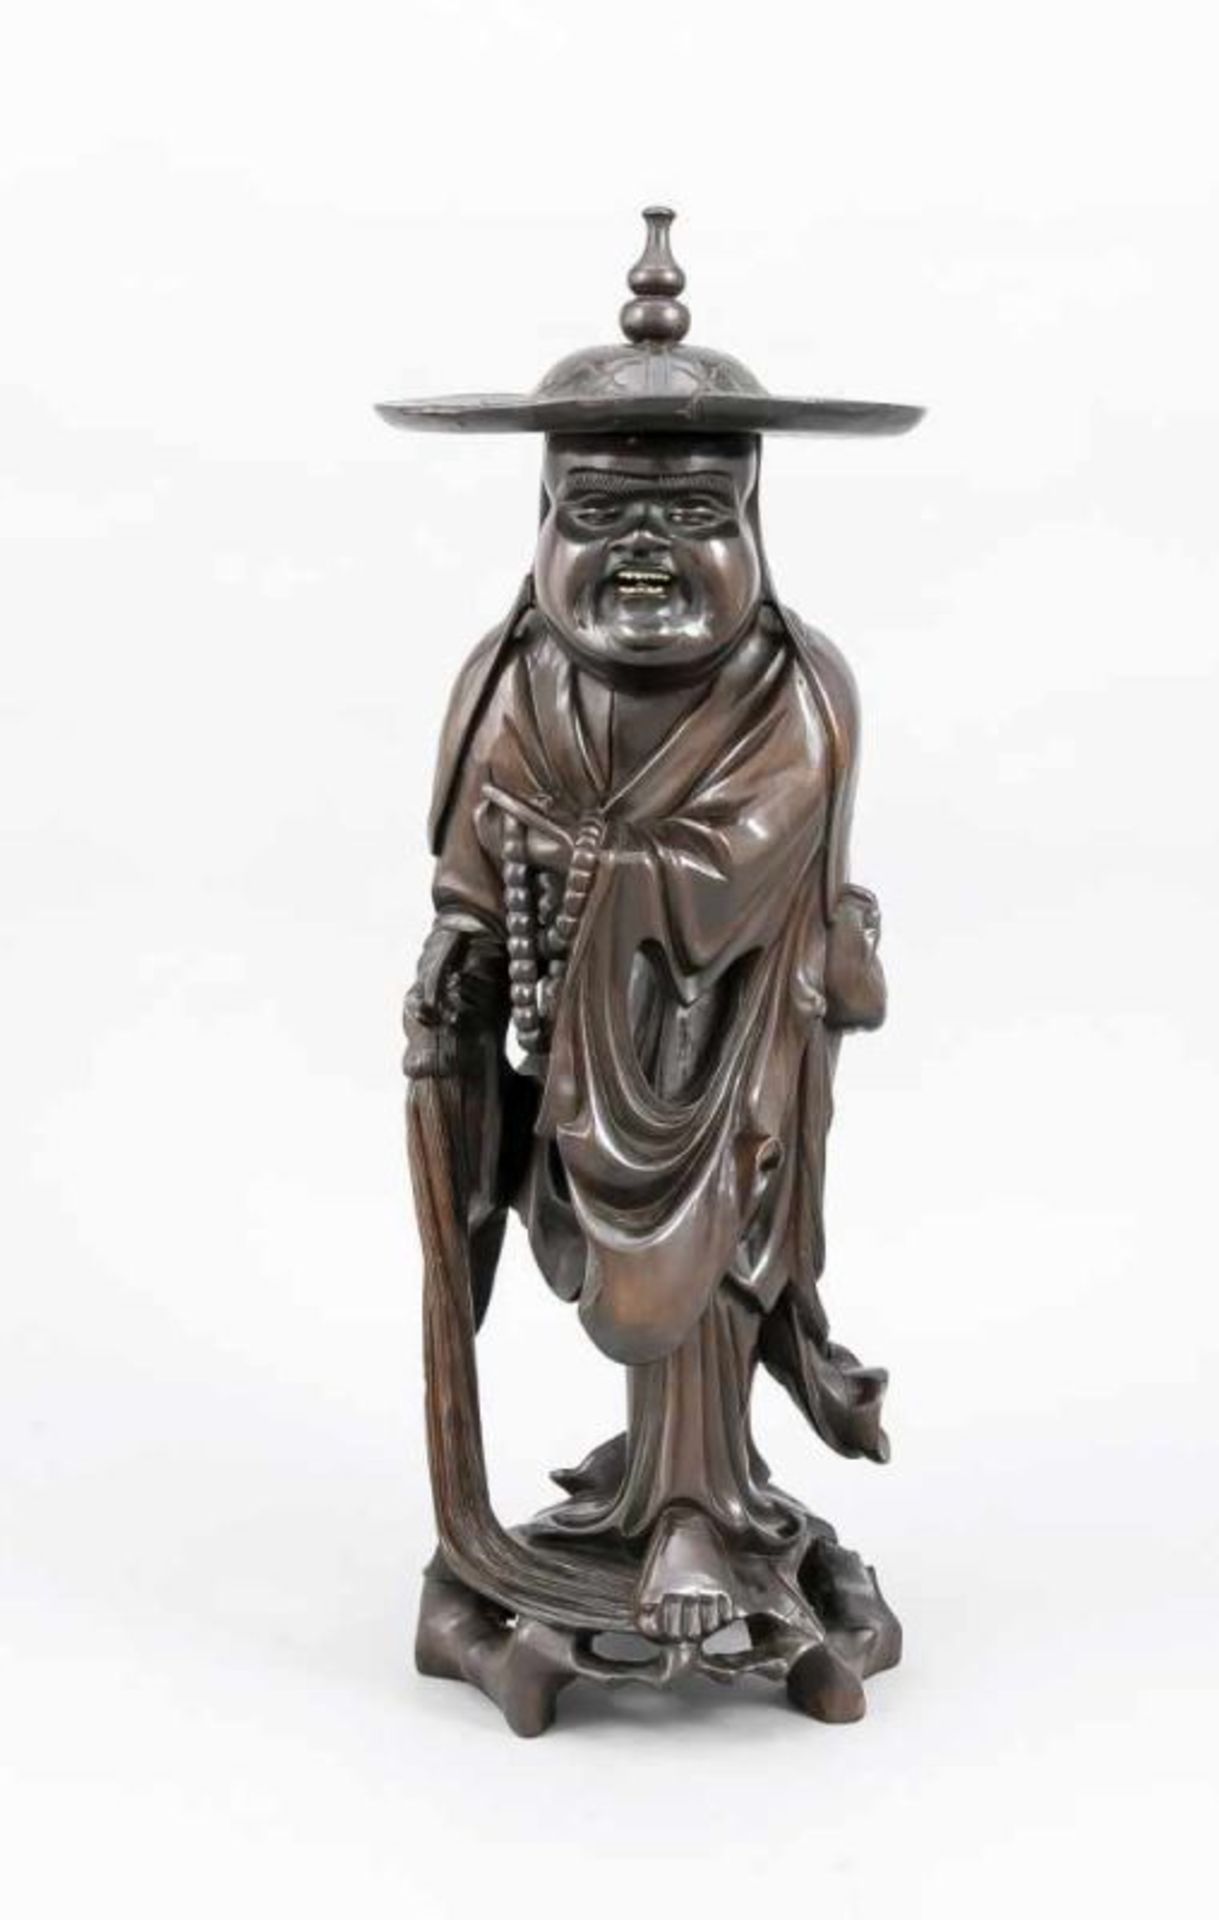 Old oriental wood carving. Chinese man with hat and bead necklace. Porcelain eyes and teeth. 20th